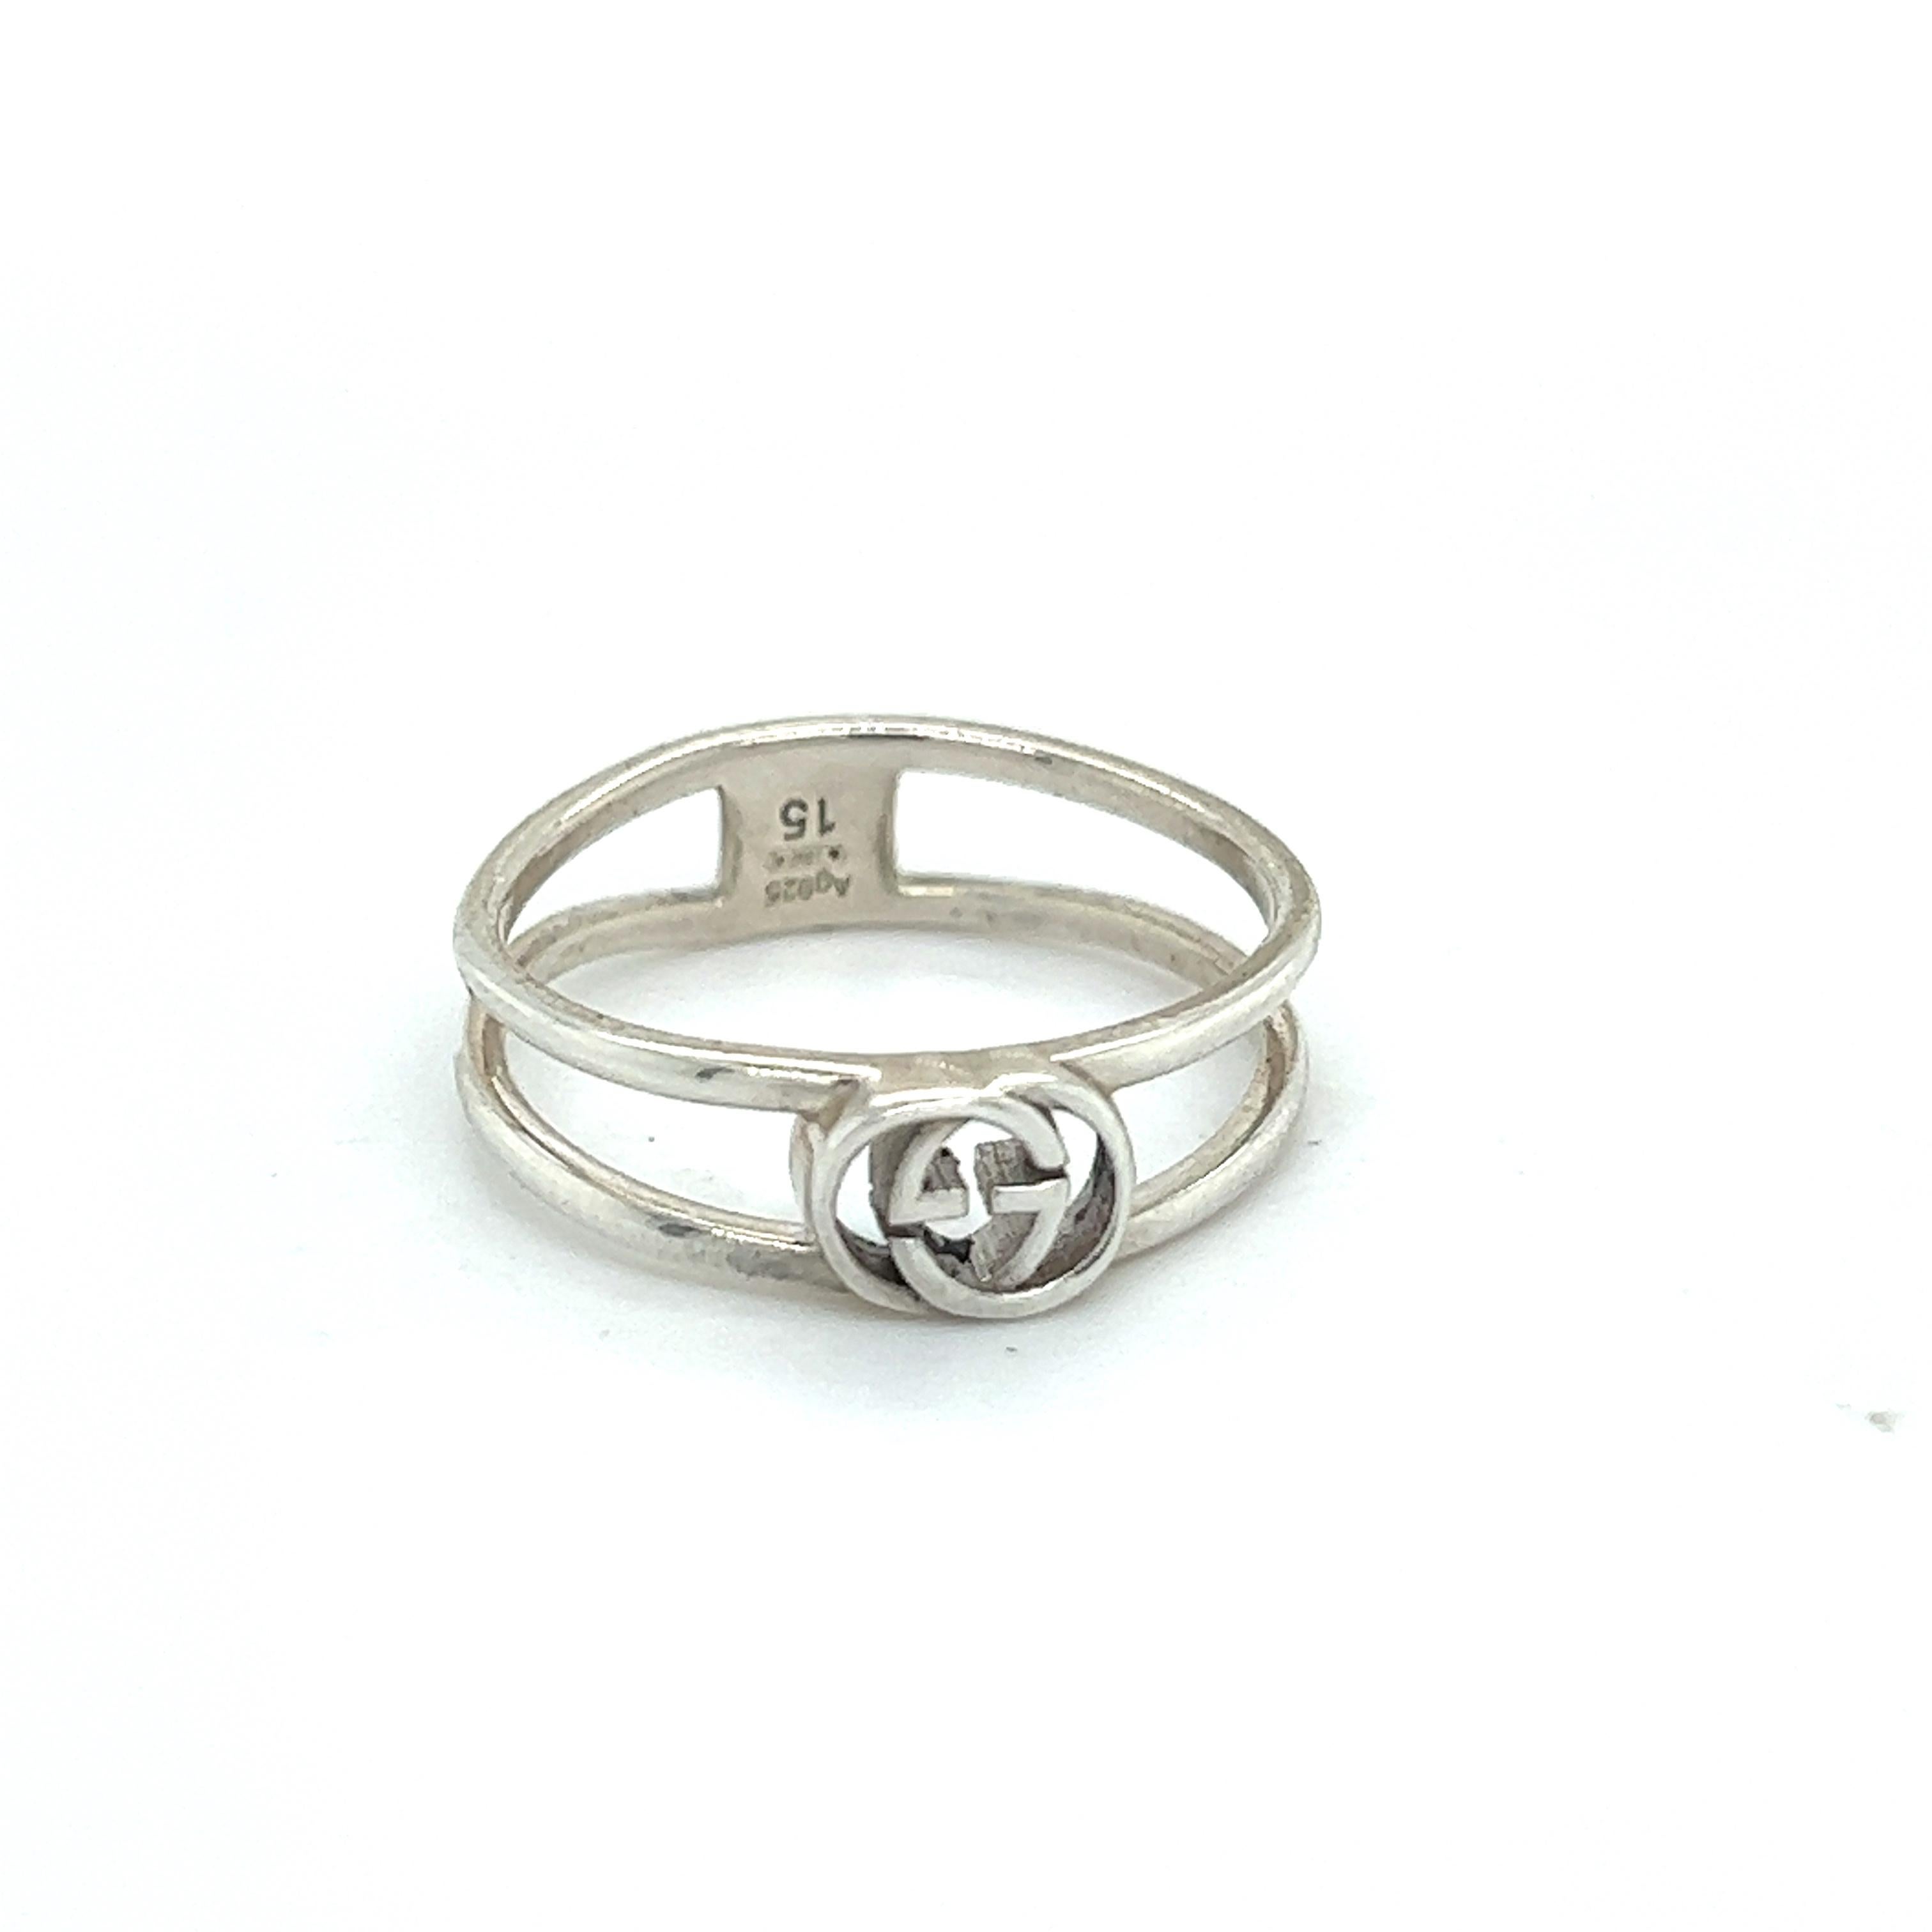 Authentic Gucci Estate Ladies Ring Size 7 Sterling Silver G16

This elegant Authentic Gucci ring is made of sterling silver and has a weight of 2.2 grams.

TRUSTED SELLER SINCE 2002

PLEASE SEE OUR HUNDREDS OF POSITIVE FEEDBACKS FROM OUR